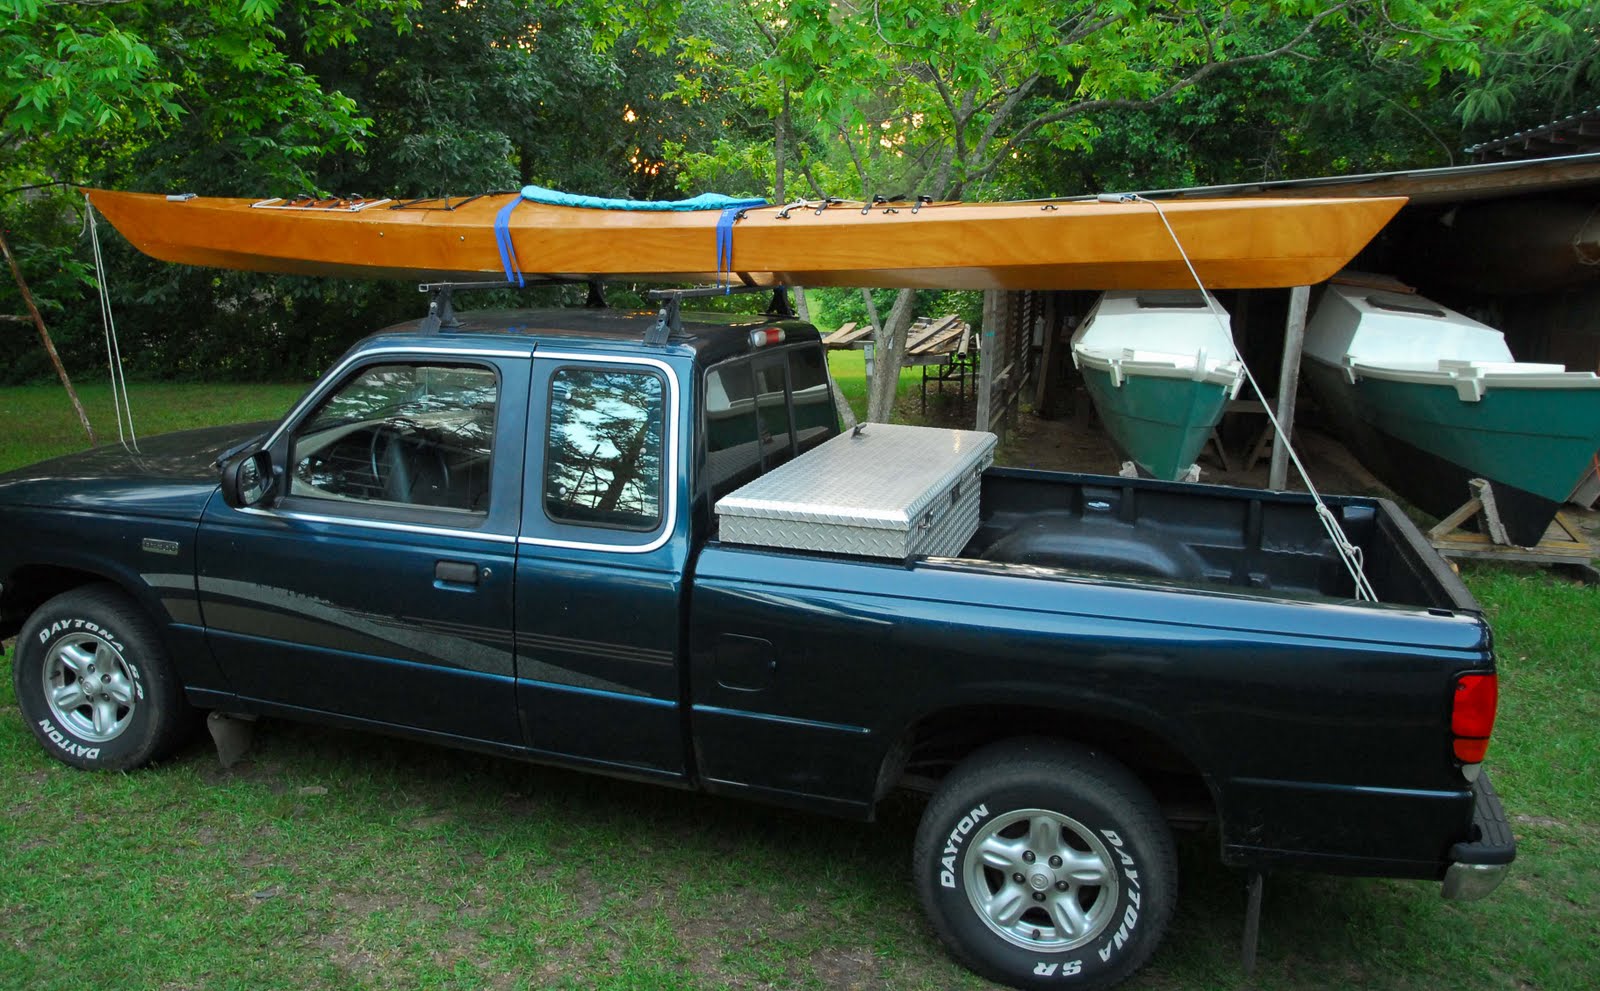 How To Buy Roof Racks On A Shoestring Budget?